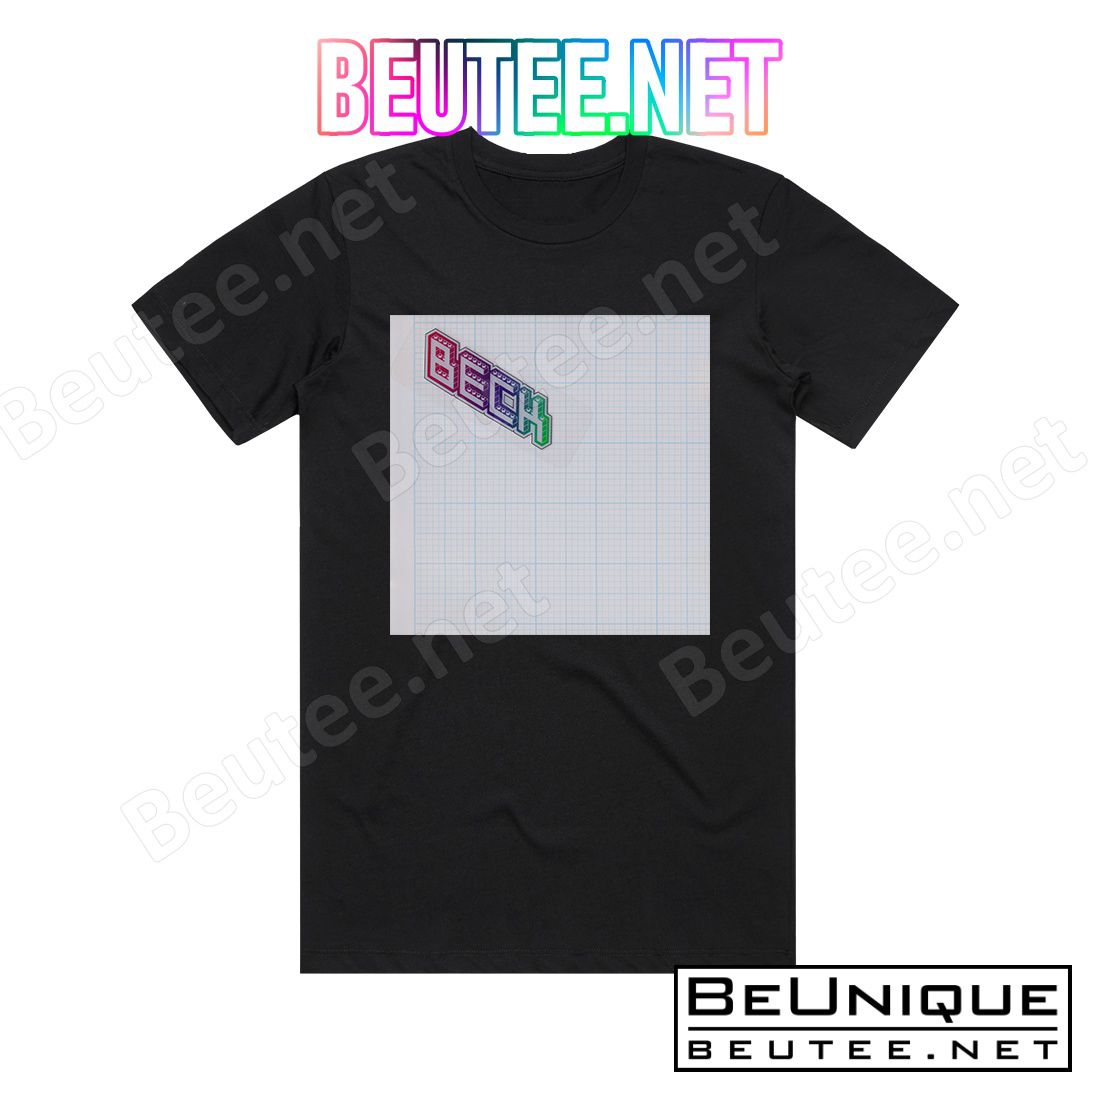 Beck The Information 1 Album Cover T-Shirt